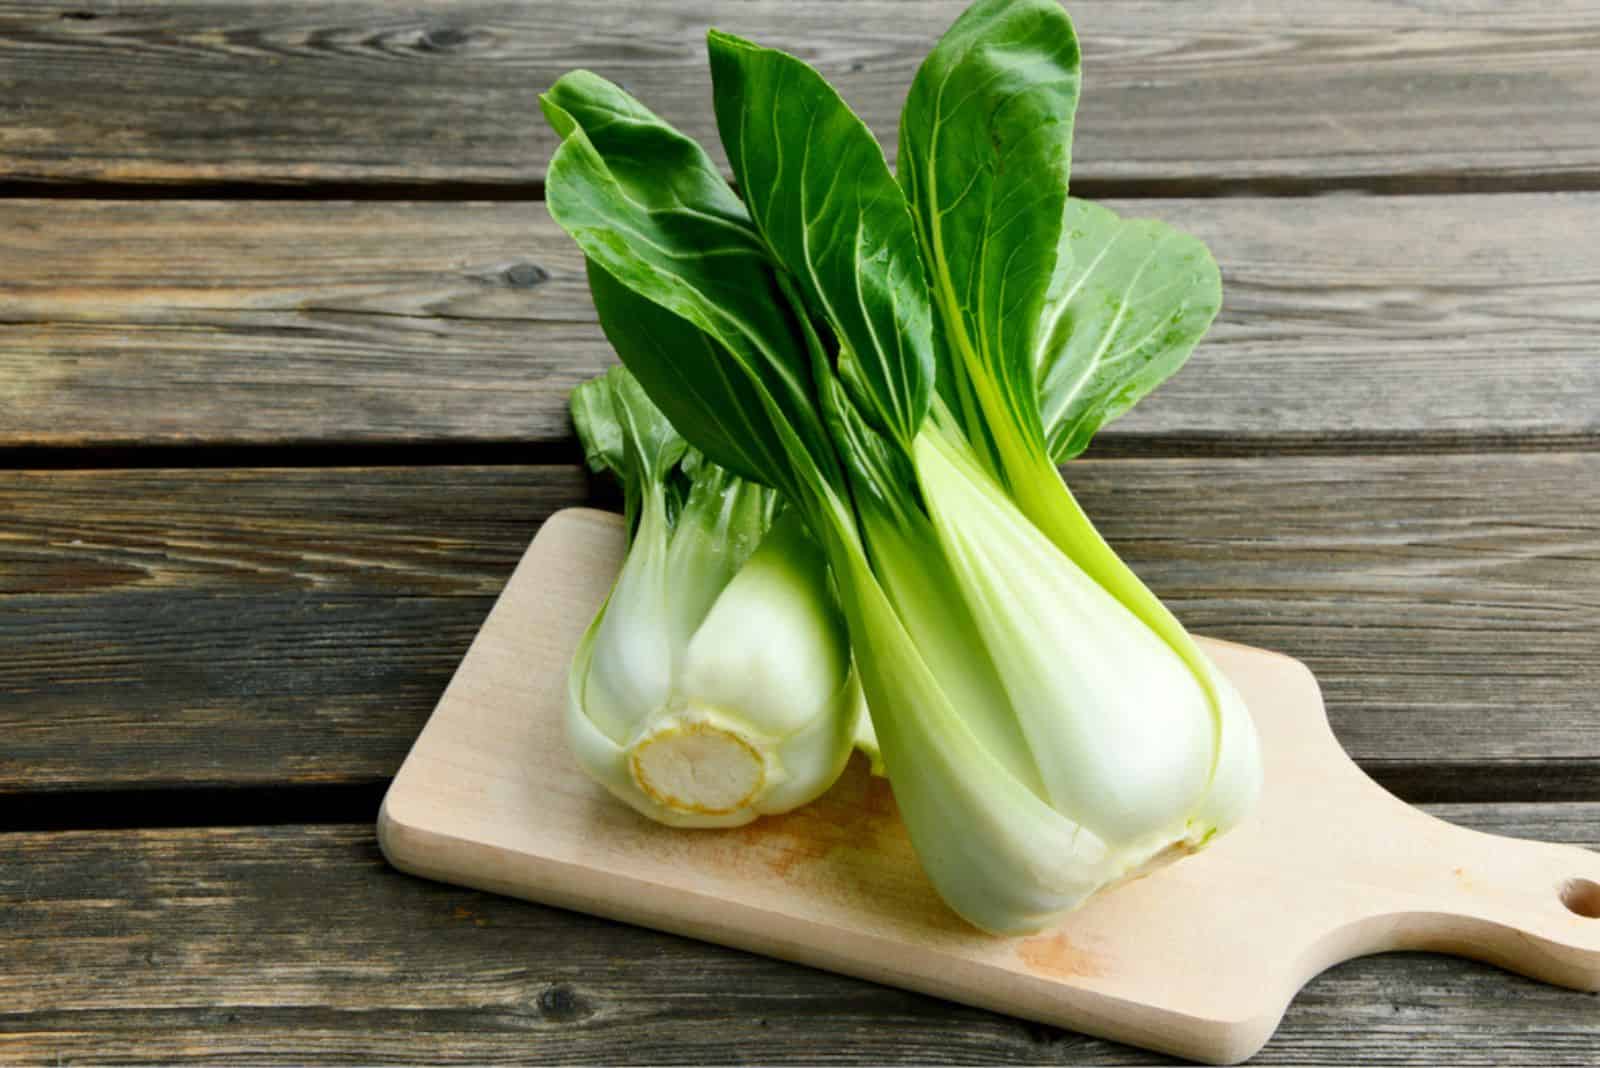 Bok choy or Chinese-cabbage on wooden board